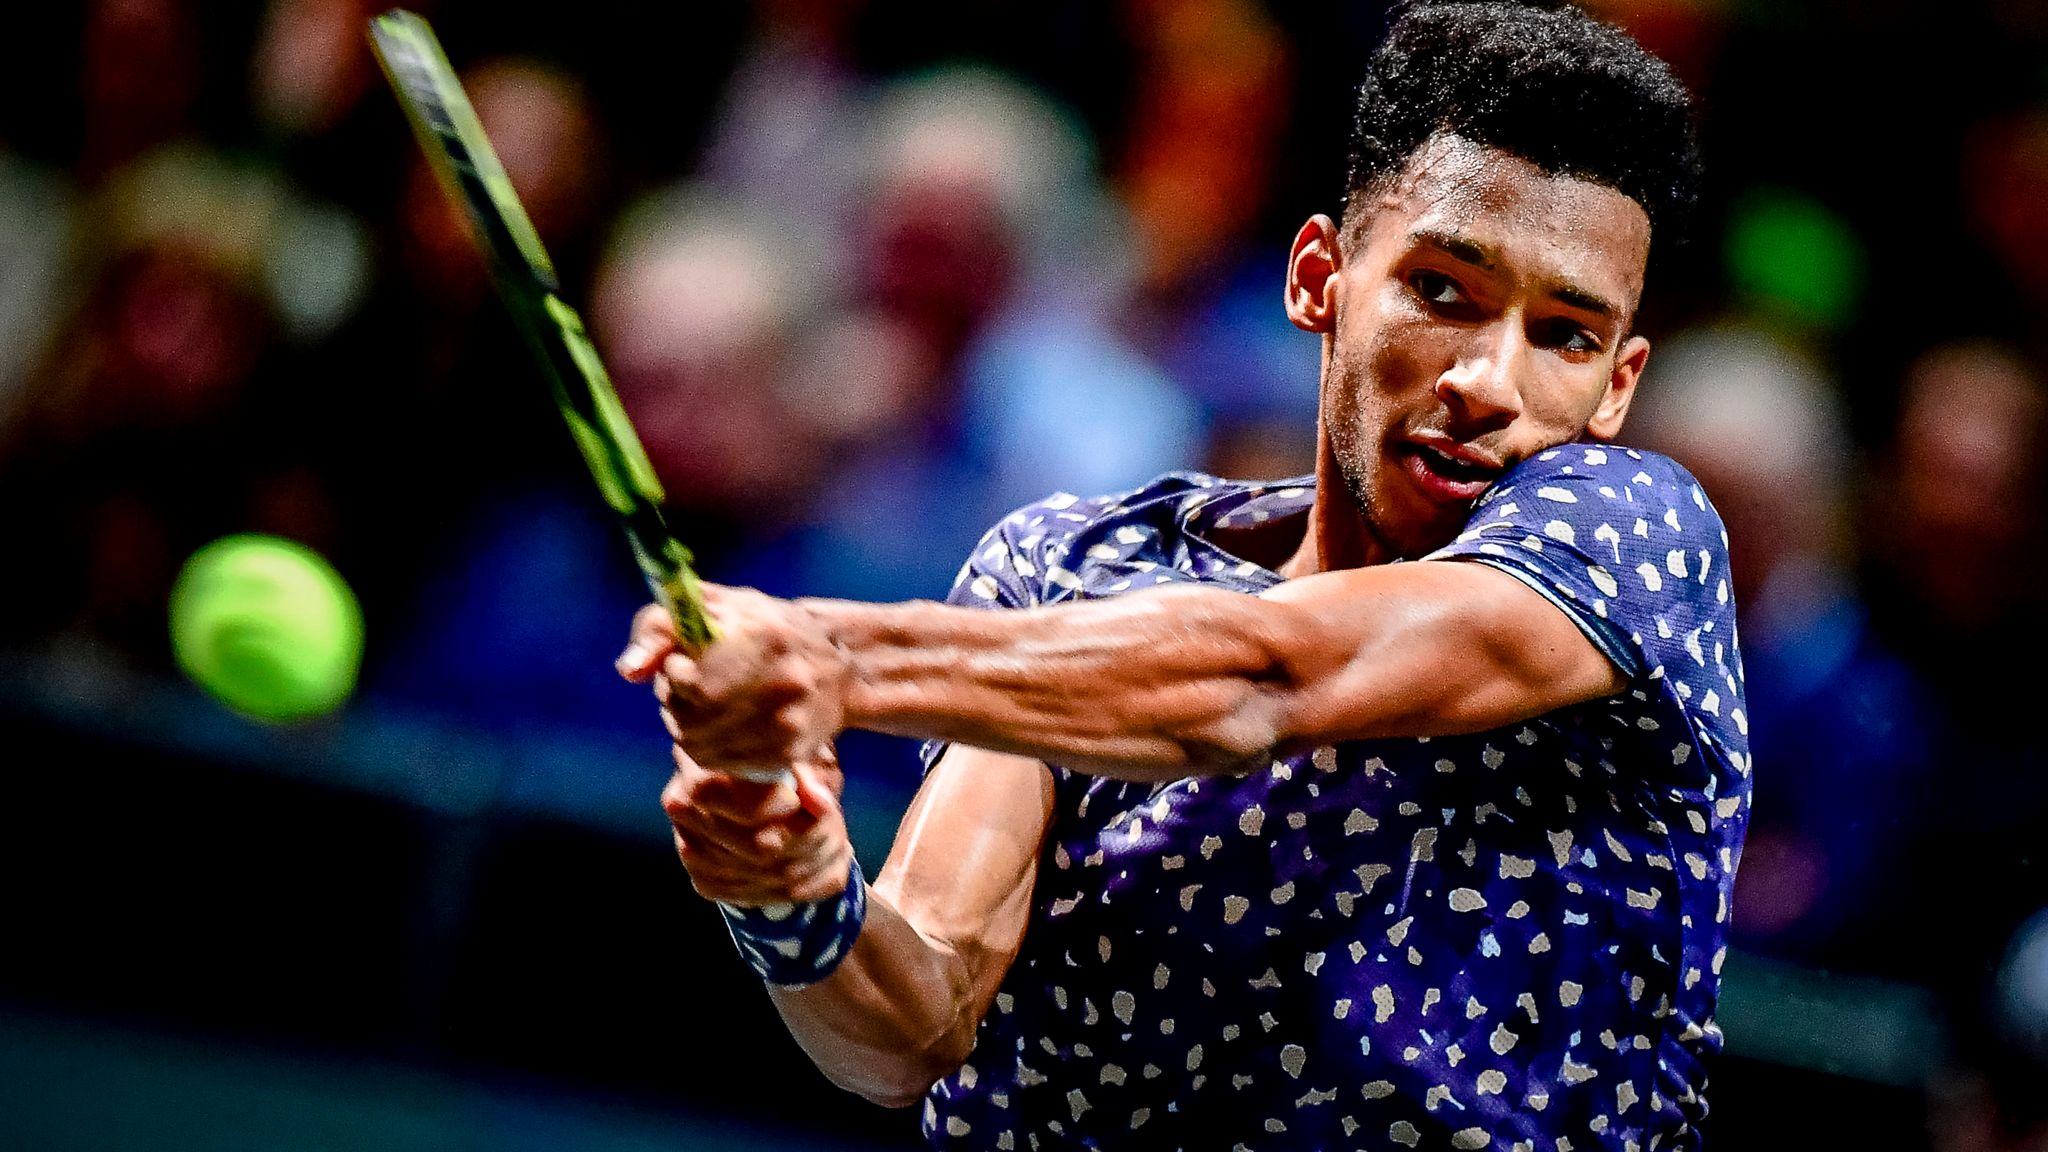 US Open Felix Auger-Aliassime happy to see different ethnicities and backgrounds at Grand Slams Tennis News Sky Sports